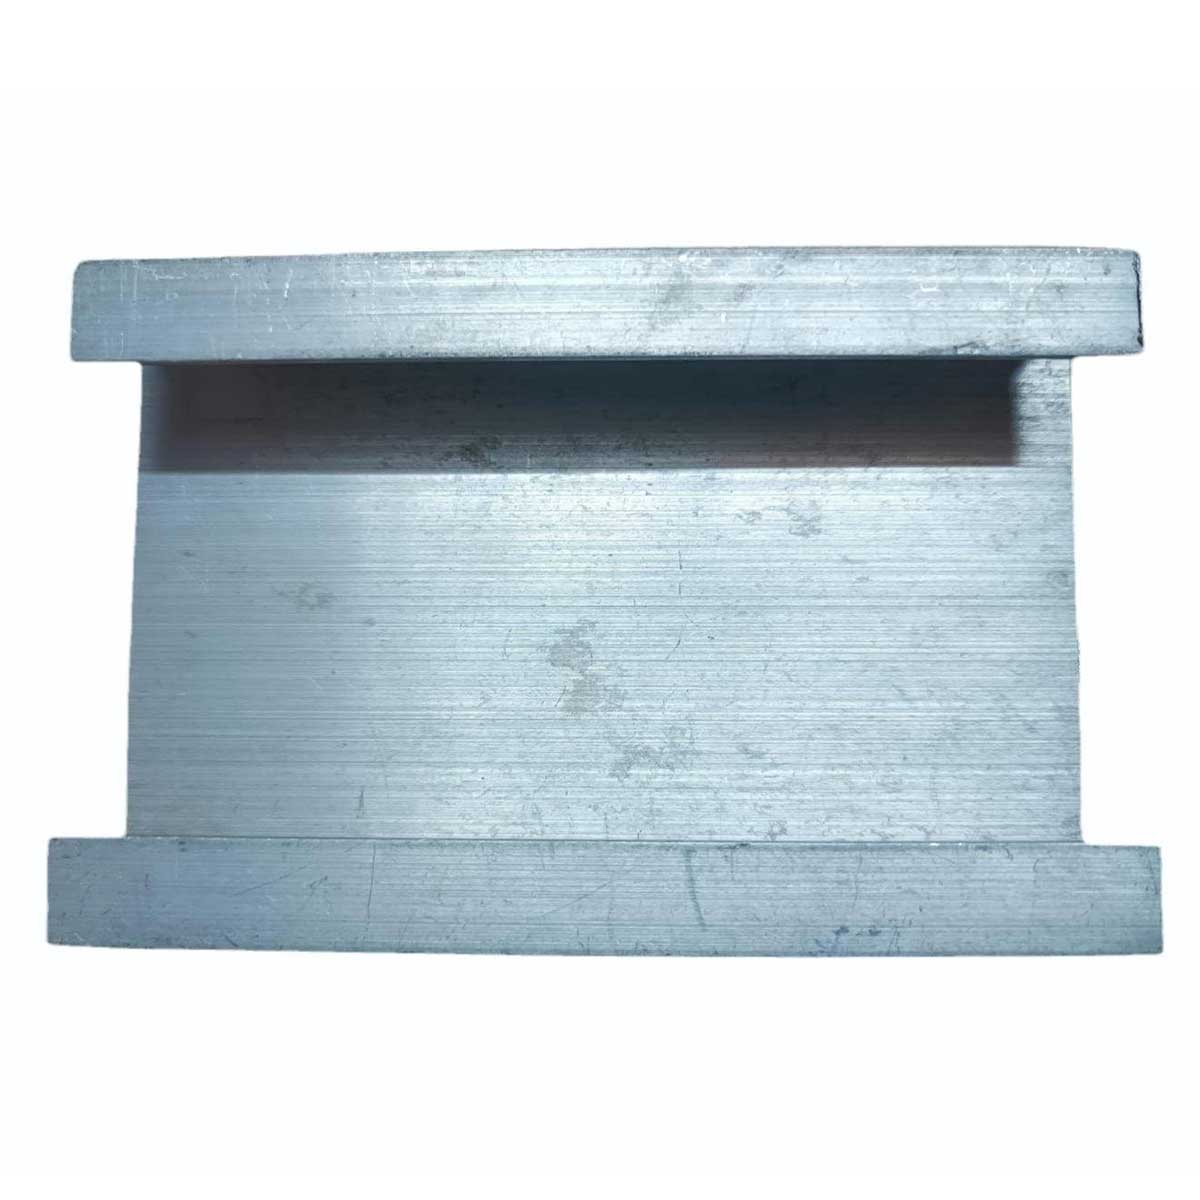 Elevation Aluminium C Channel Manufacturers, Suppliers in Panipat